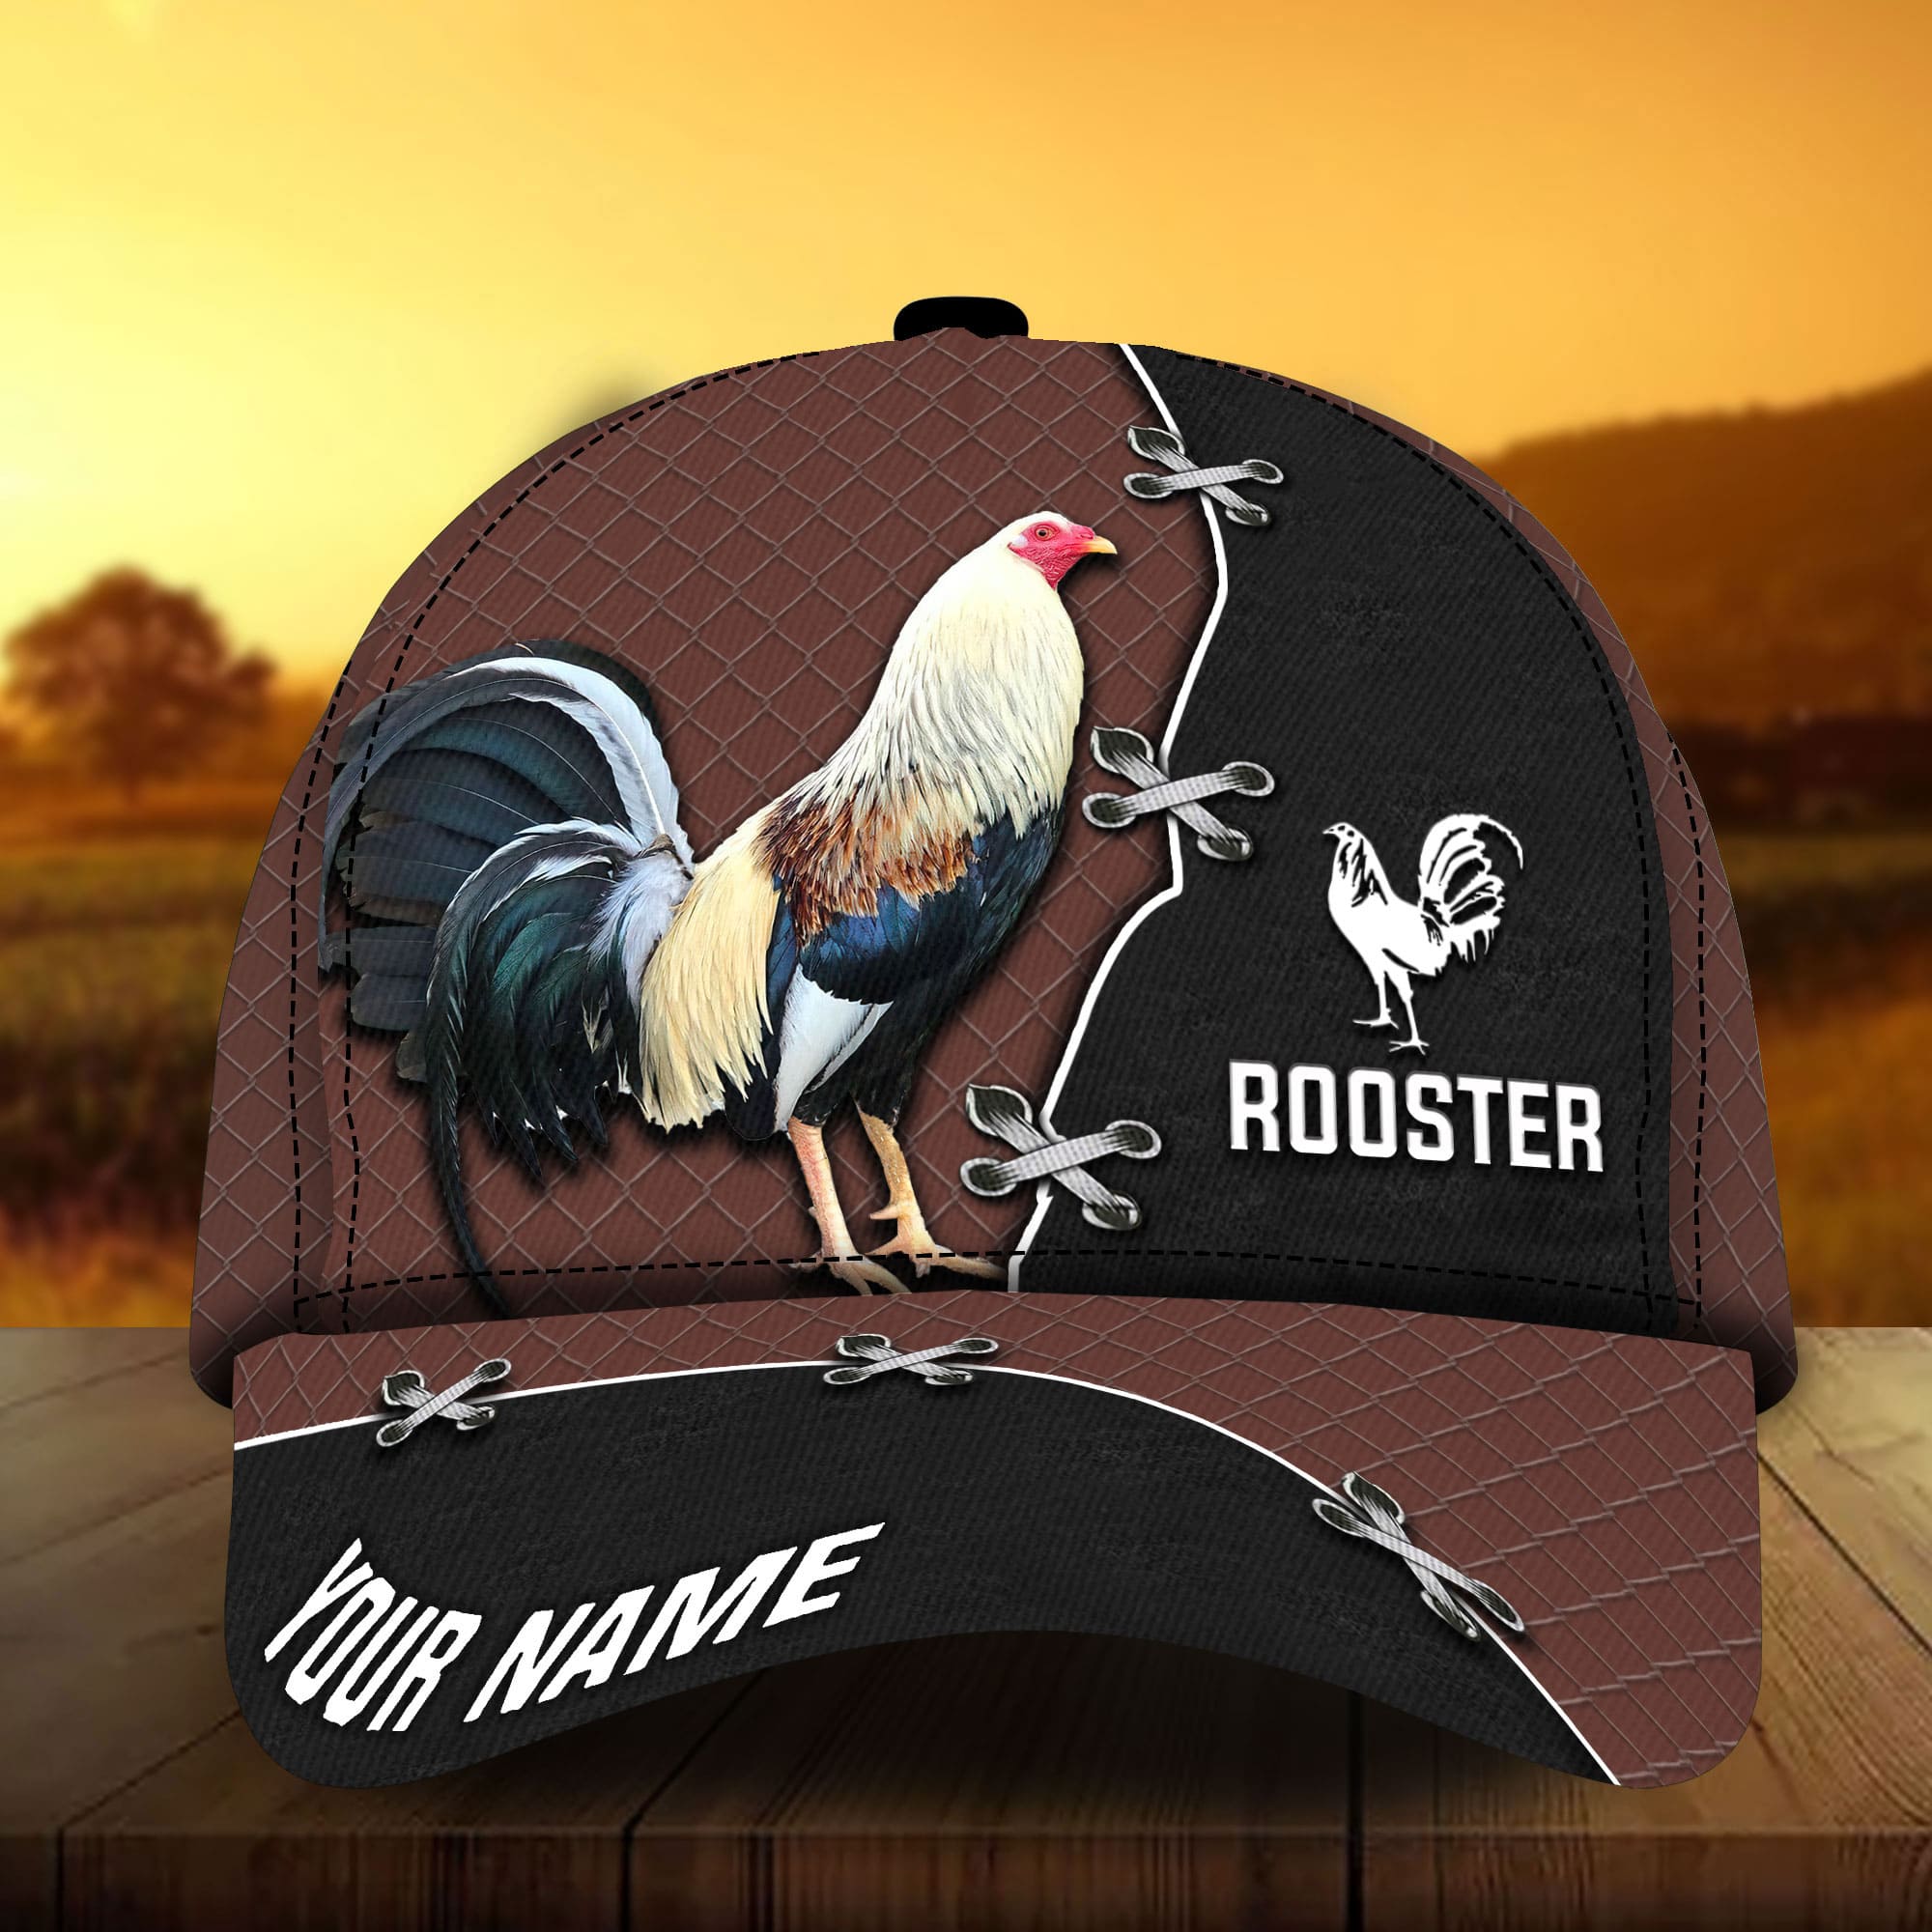 Personalized 3D Full Printed Cap Hat For Rooster Lover/ Premium Rooster 3D Cap Hat Multicolor/ Cap With Chicken